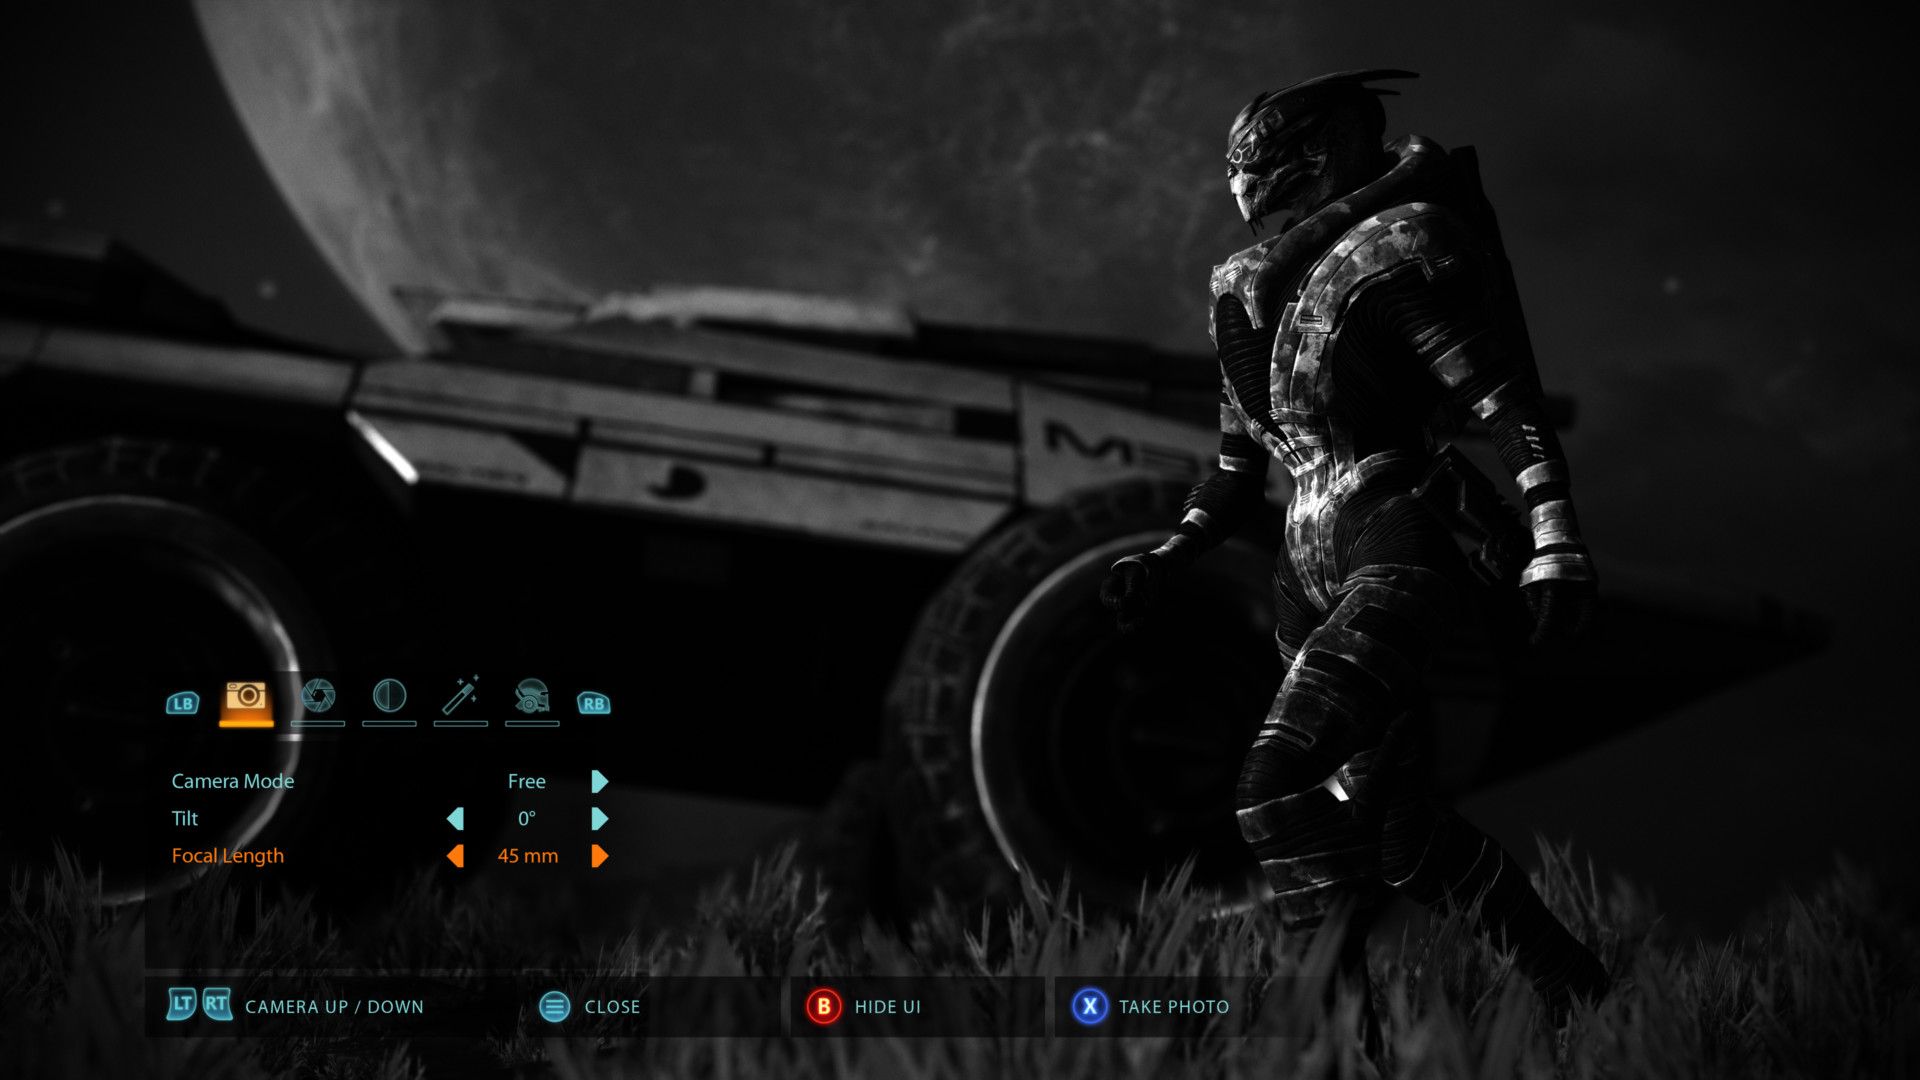 Mass Effect Legendary Edition will let you take photo of your alien crush